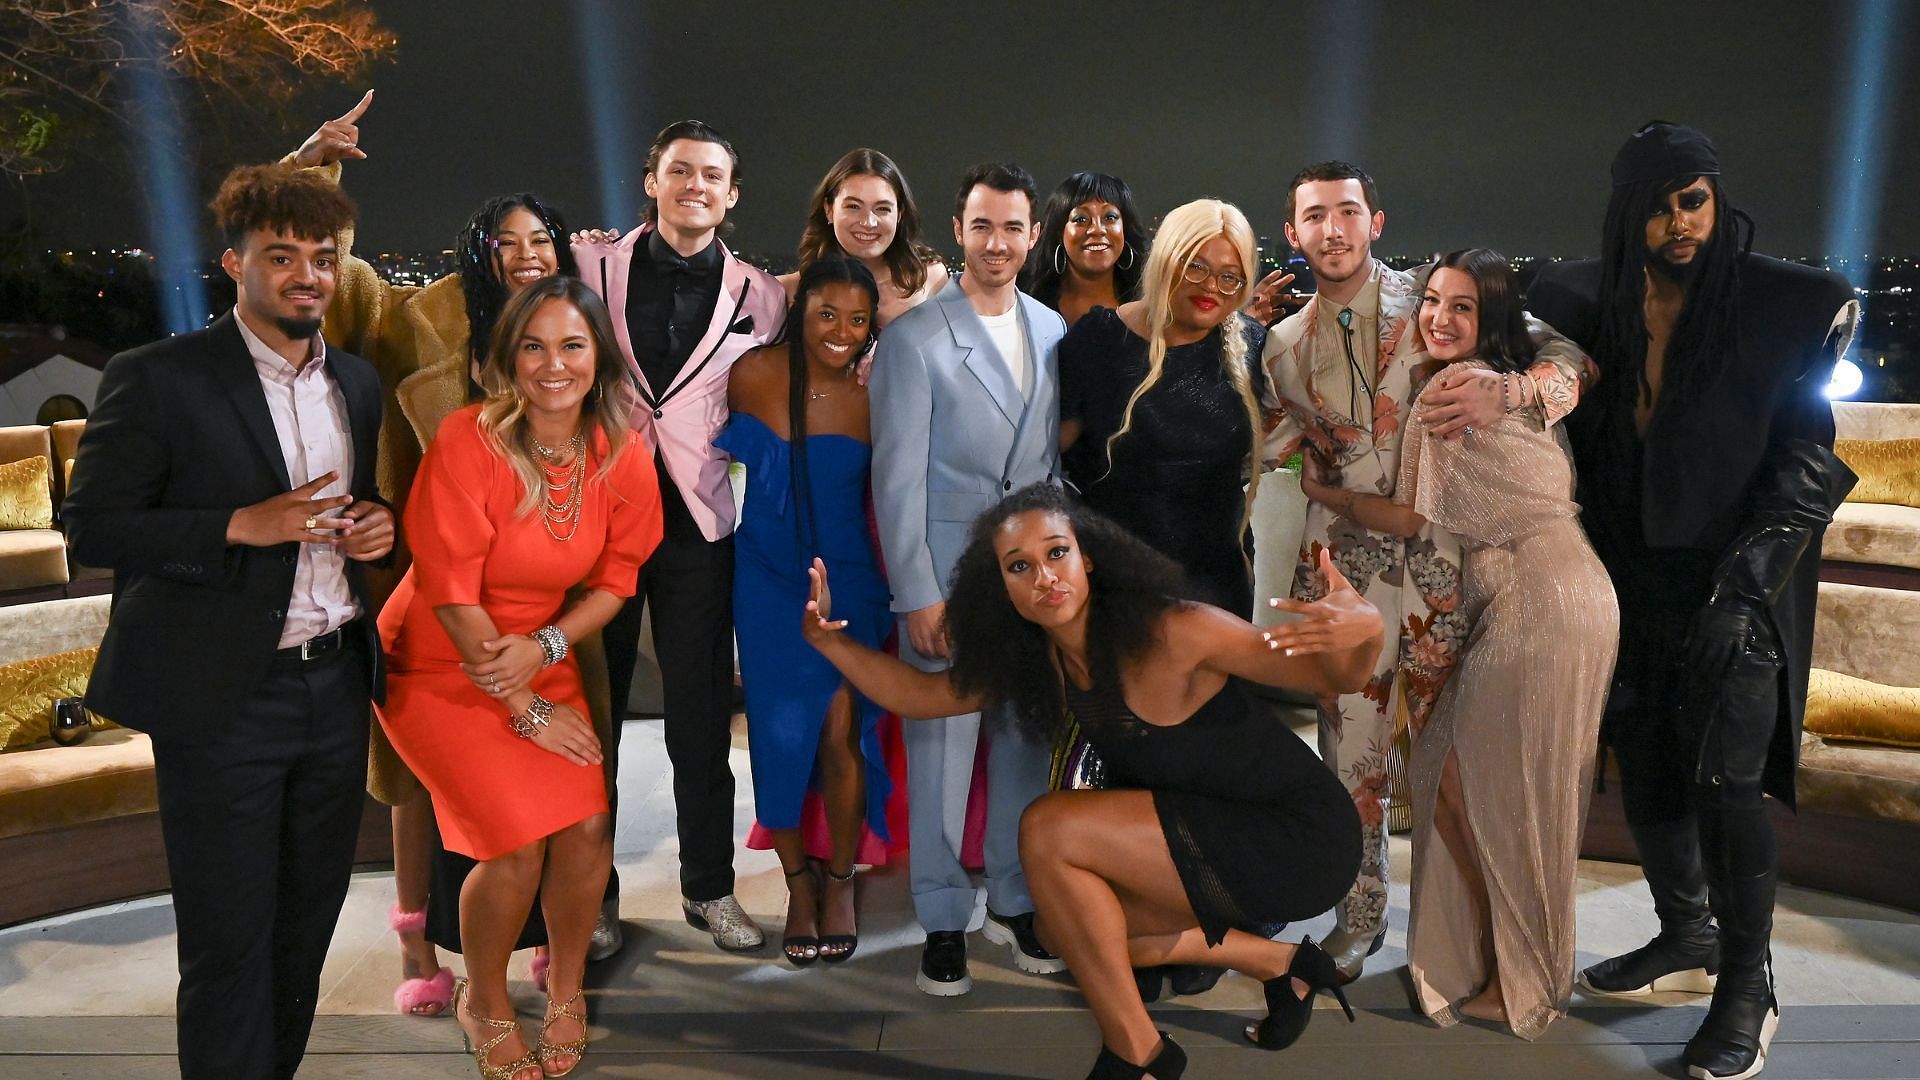 Claim to Fame Season 1 Complete list of contestants and their